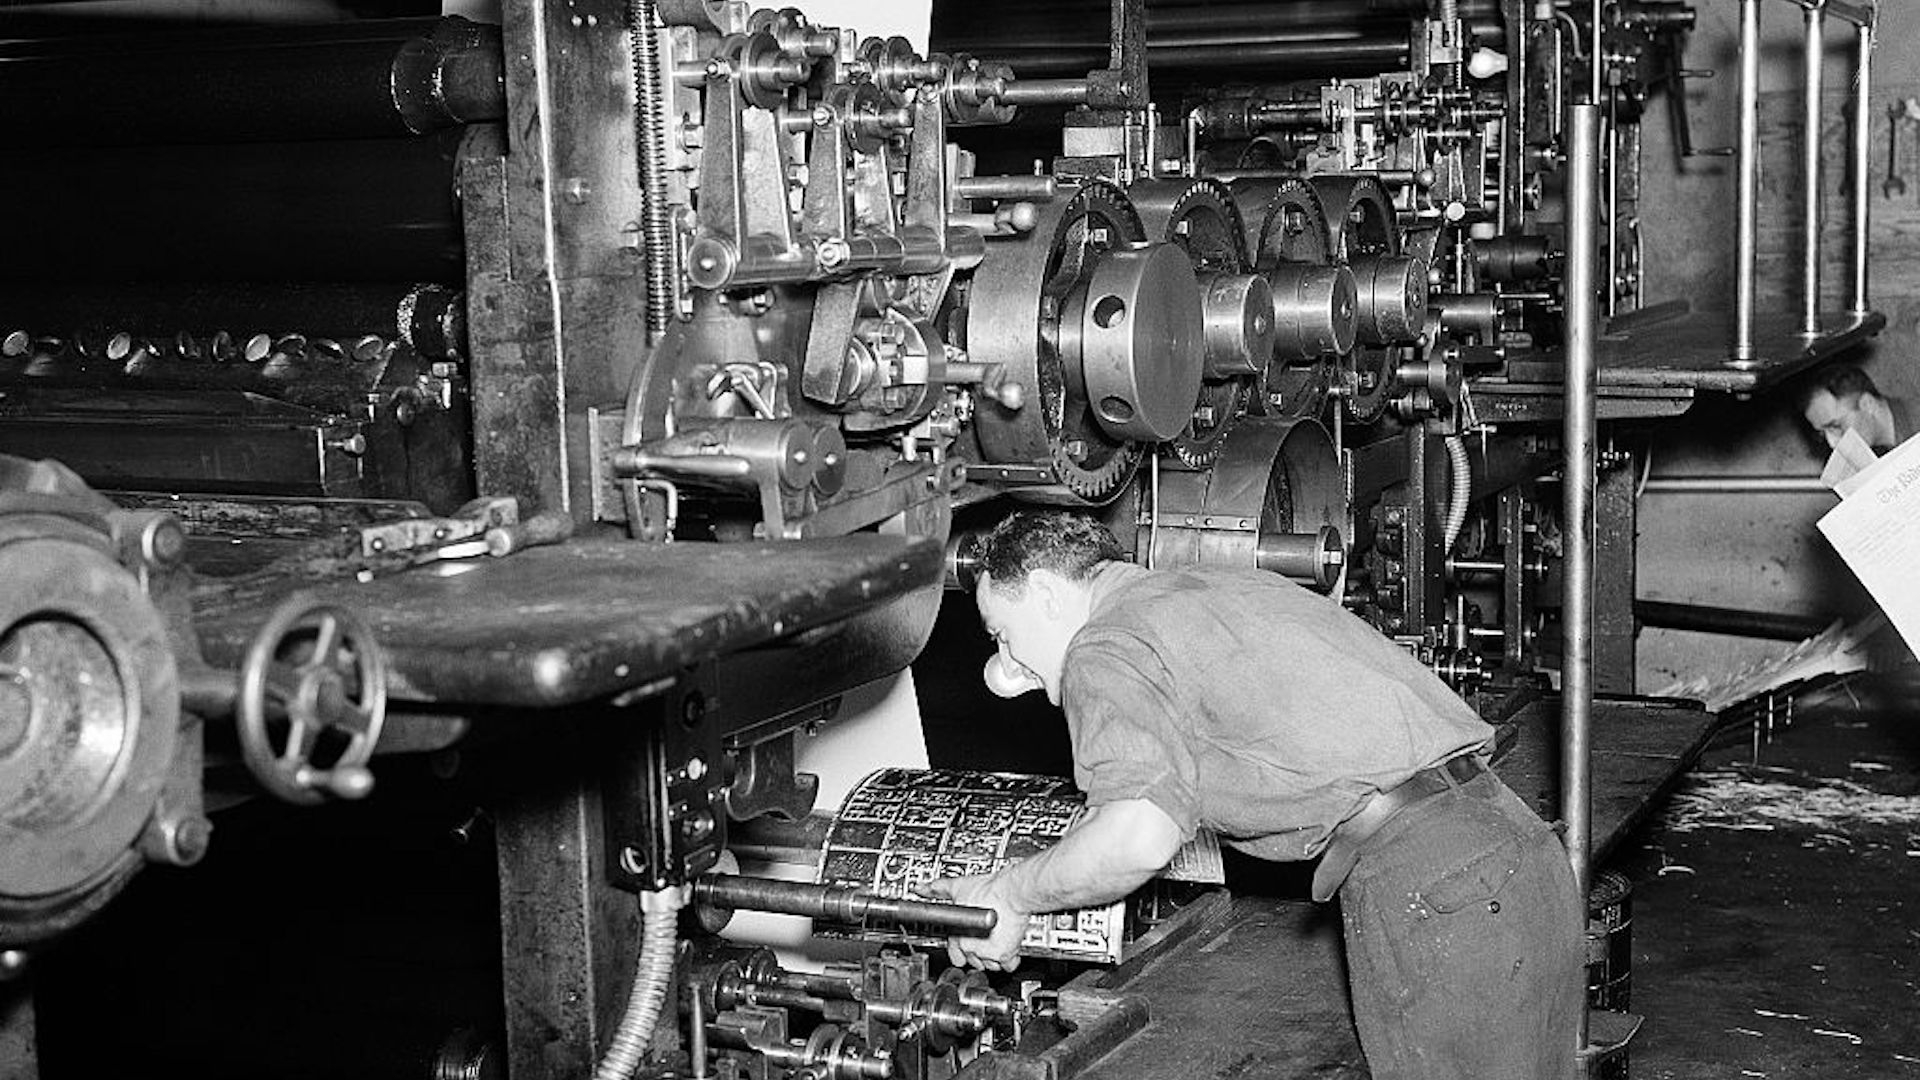 (Original Caption) Ridgewood, NJ-: Attaching one of the plates (stereotype) to a cylinder on a medium size newspaper press. Ca. 1940s-1950s.